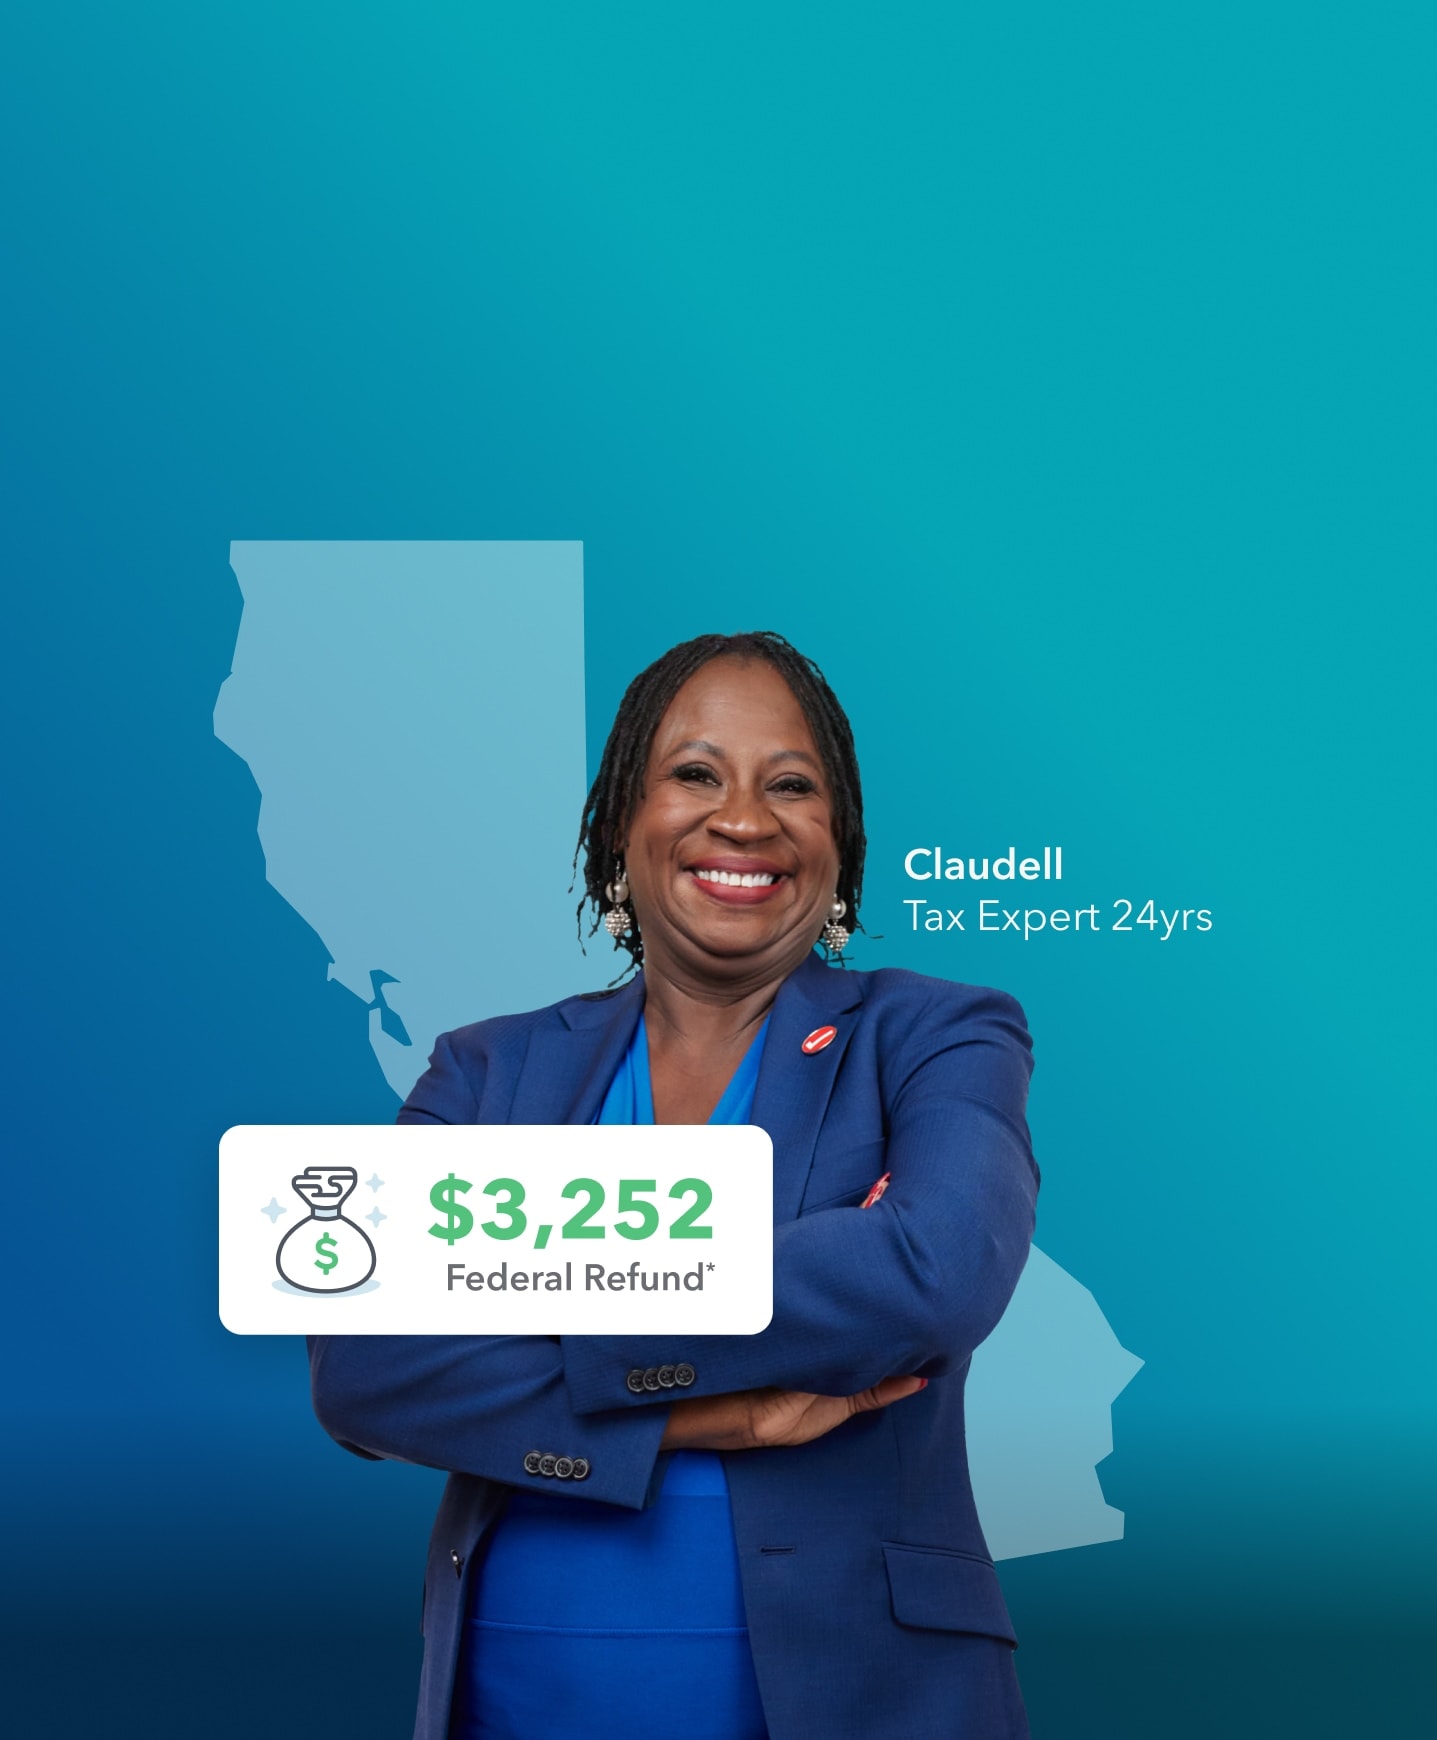 Tax Expert Claudell is smiling with her arms crossed next to the average refund amount of $3,252, and the state of California is behind her.